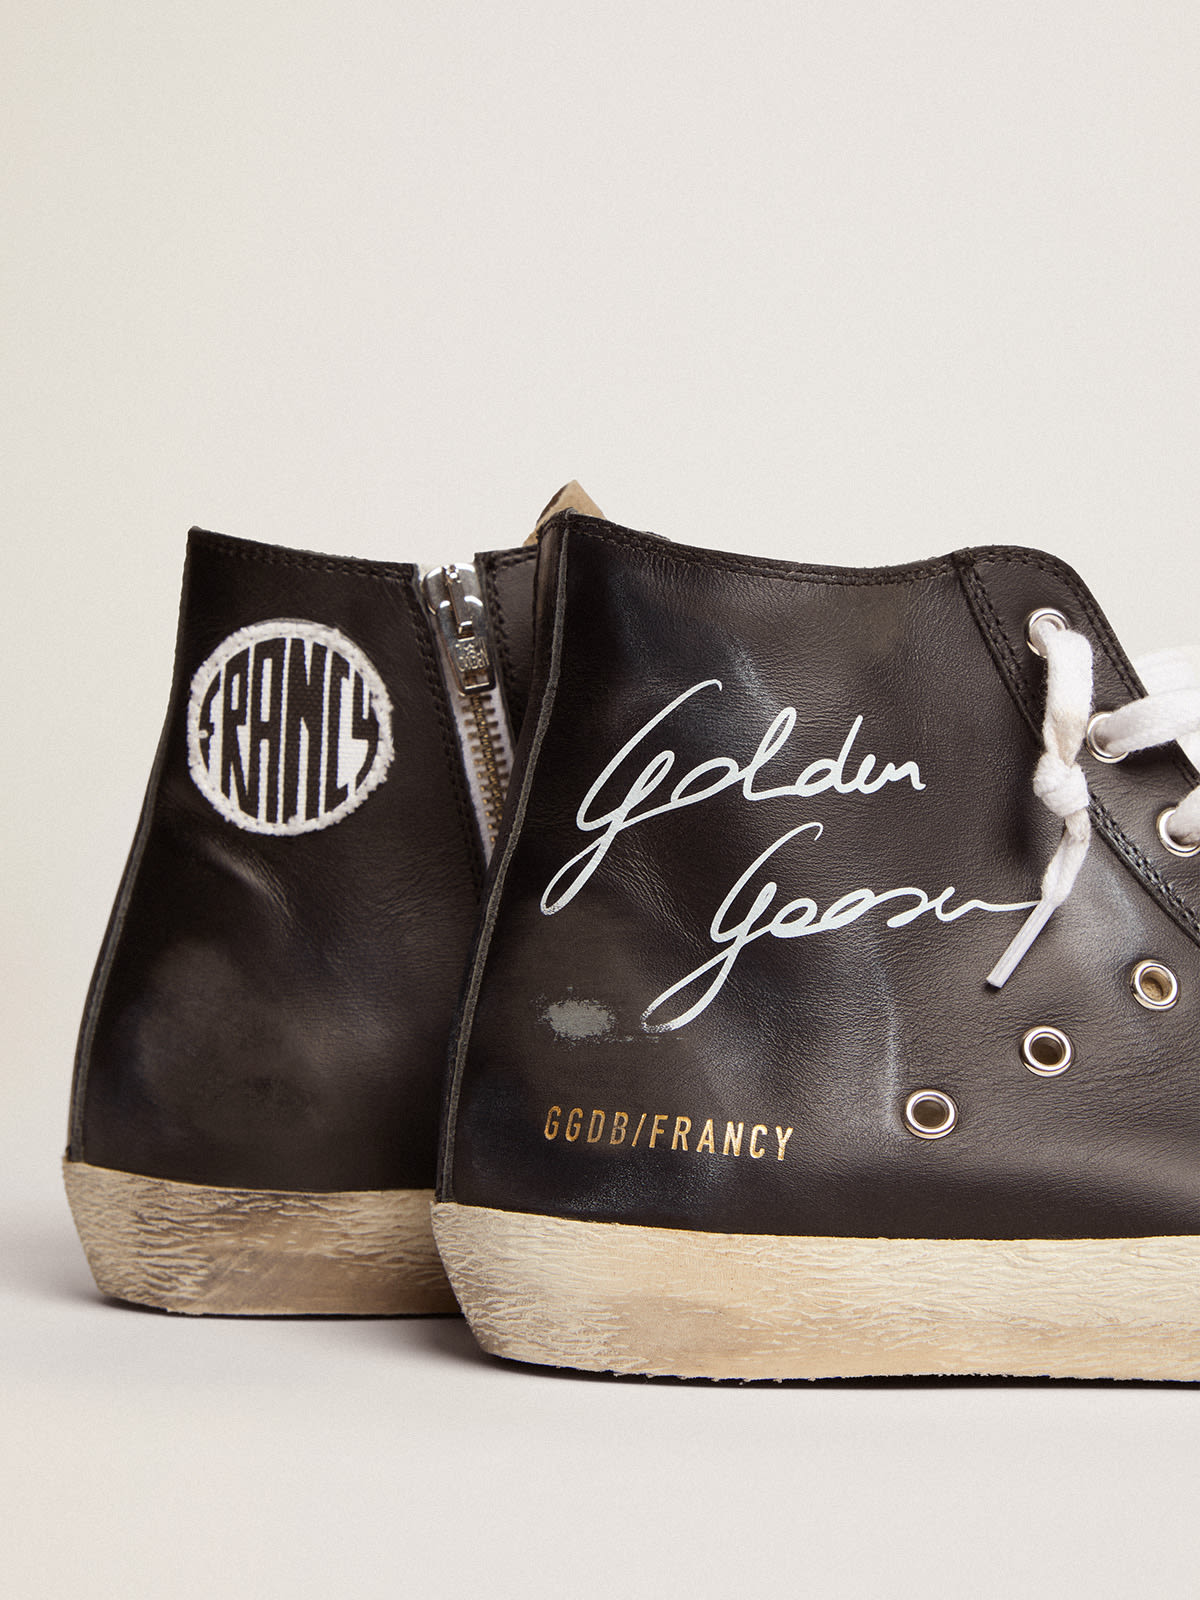 Golden Goose - Francy sneakers with black leather upper and white leather star in 